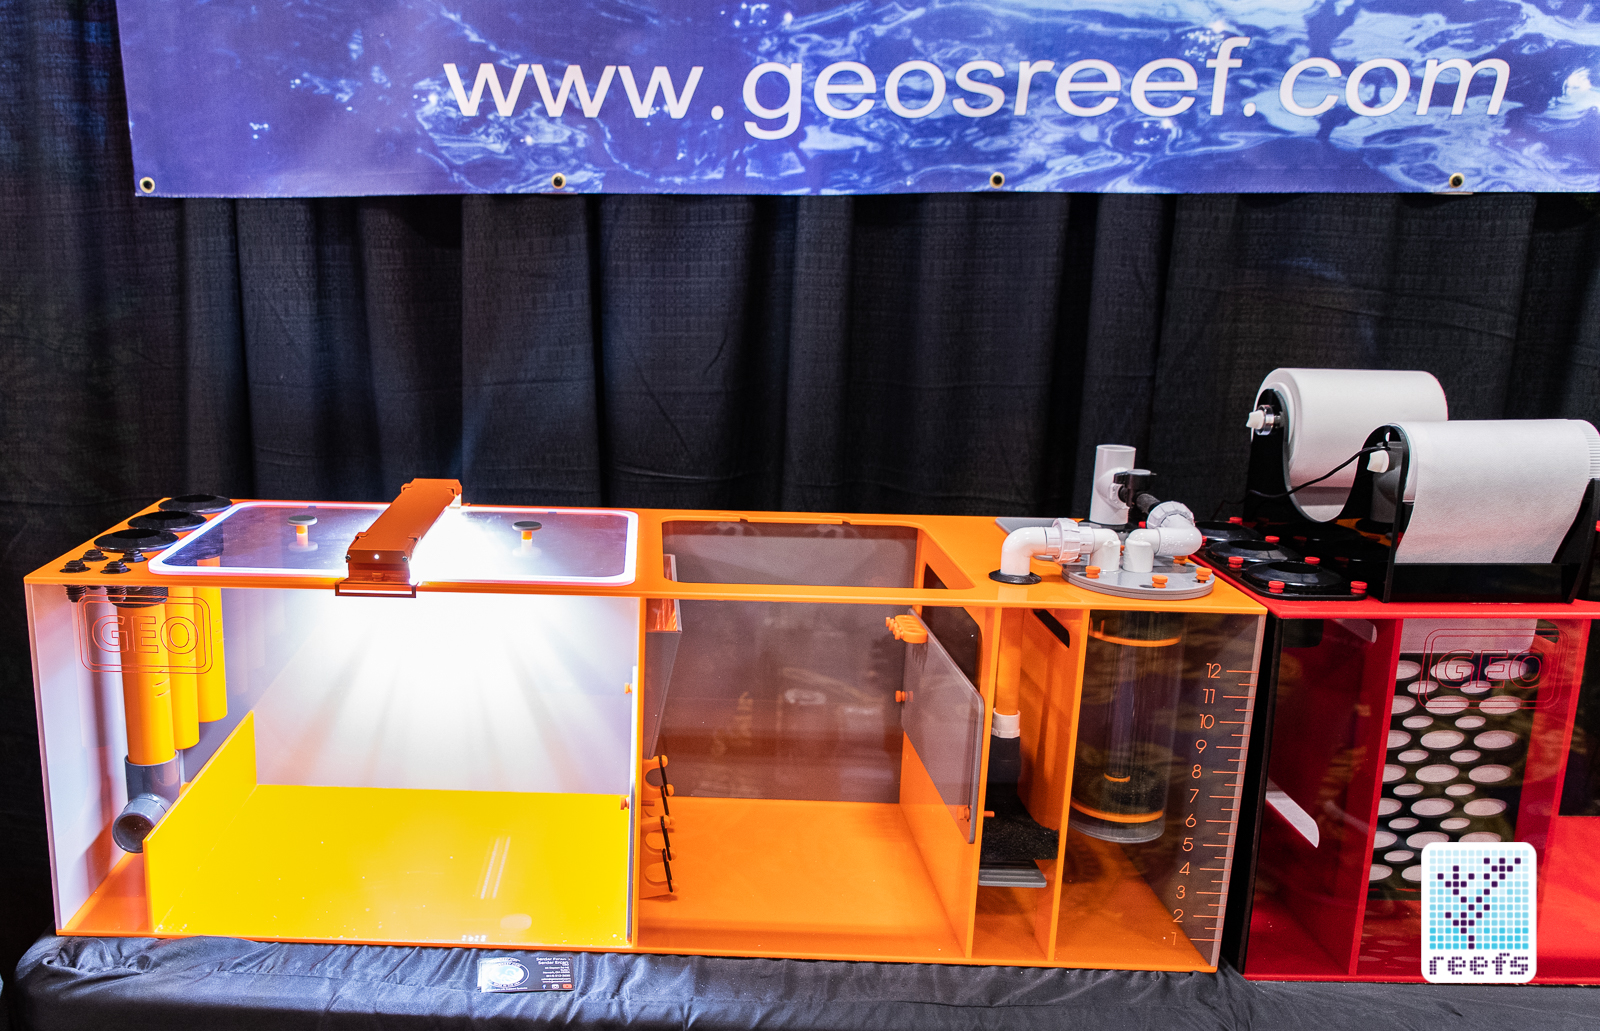 Geo's Reef Automatic Filter Roll Sumps